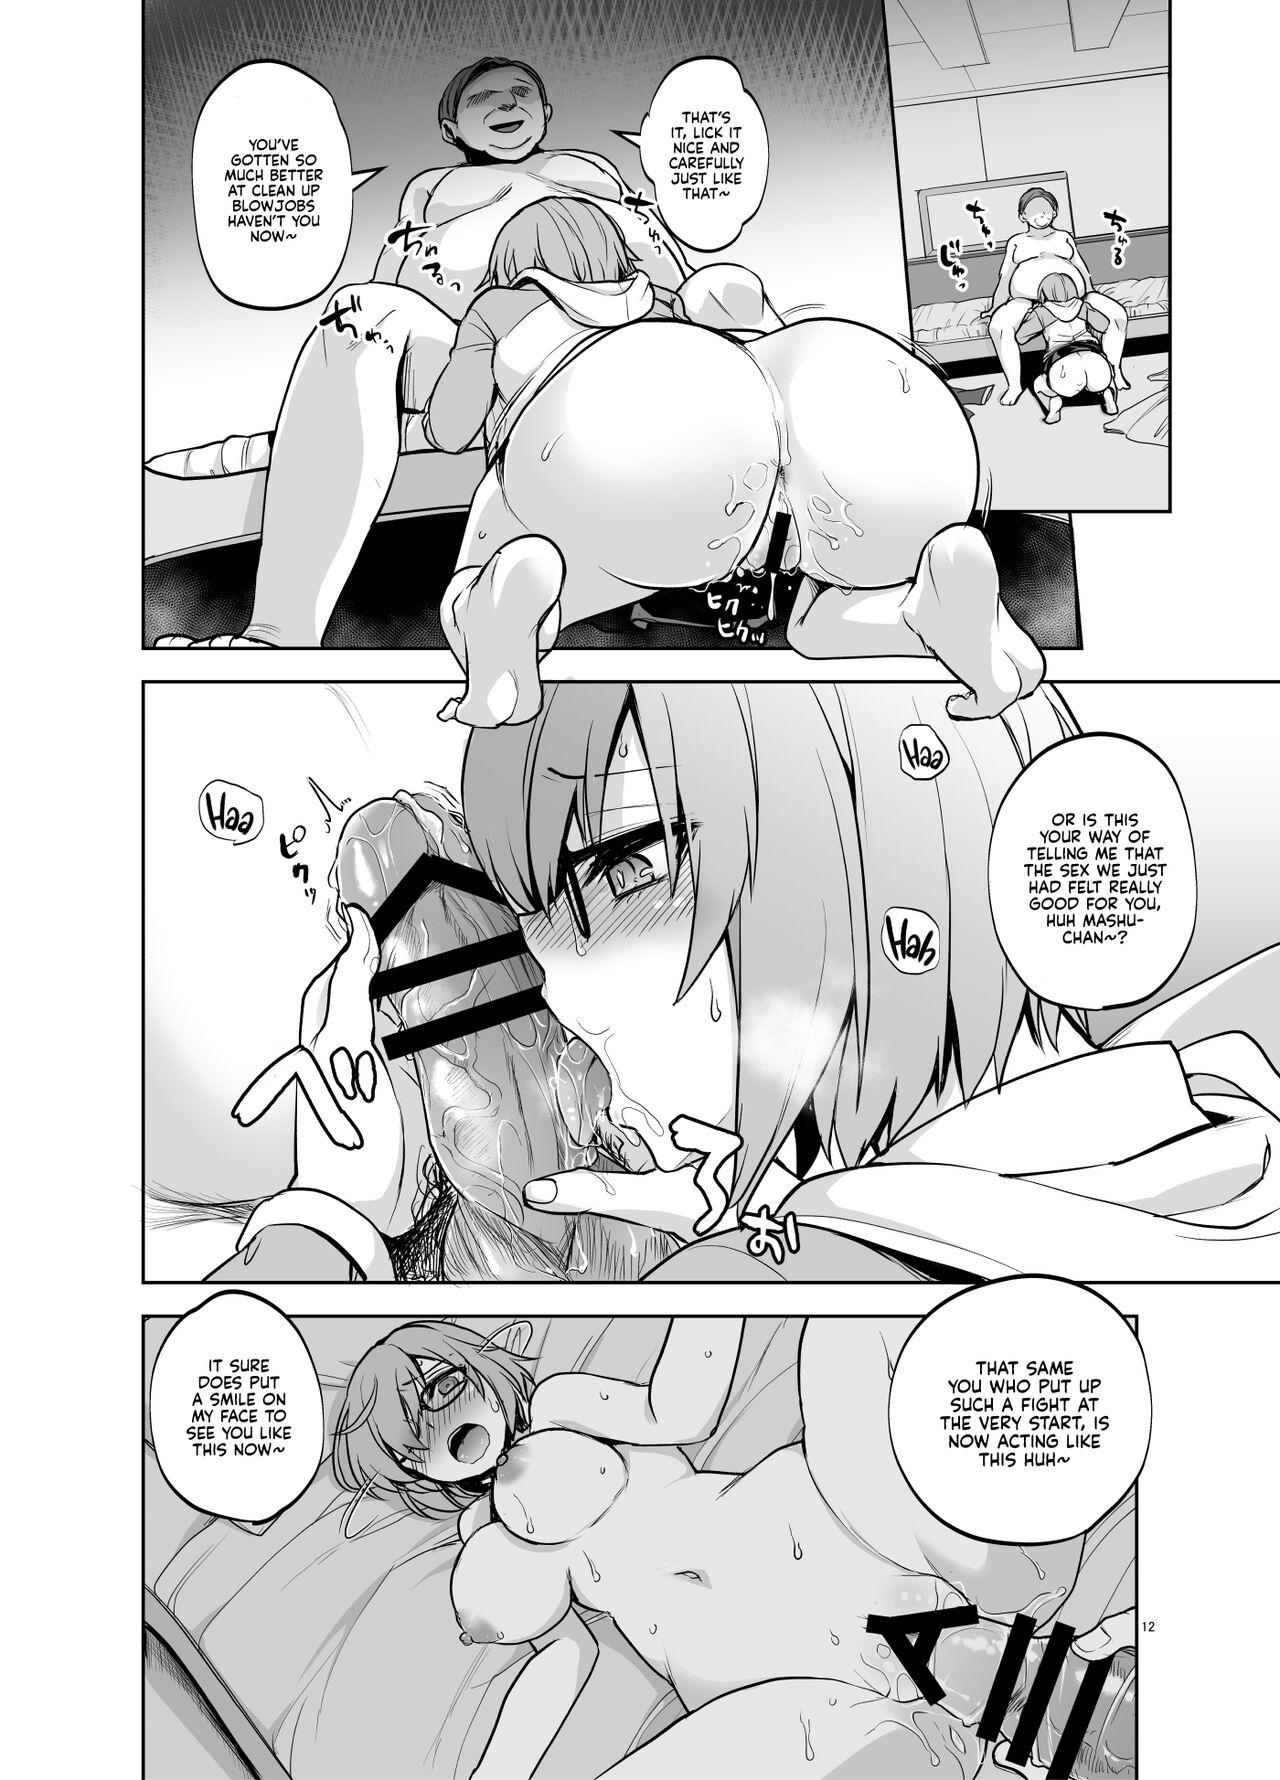 Style Mashu Must Deal with this Pushy n' Lusty Oji-san Whenever Senpai is Busy Rayshifting! - Fate grand order Real Amature Porn - Page 11